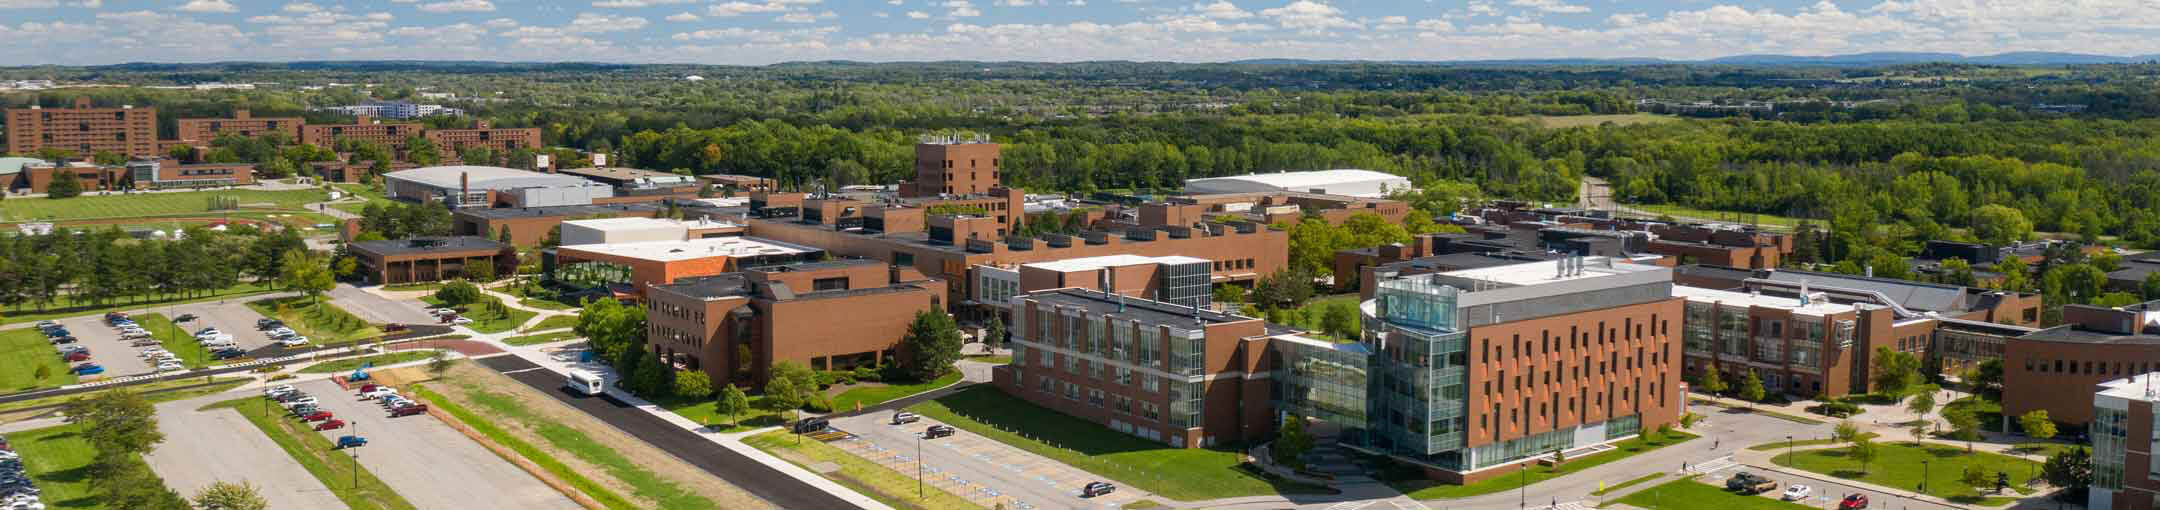 Aerial view of the R I T campus.